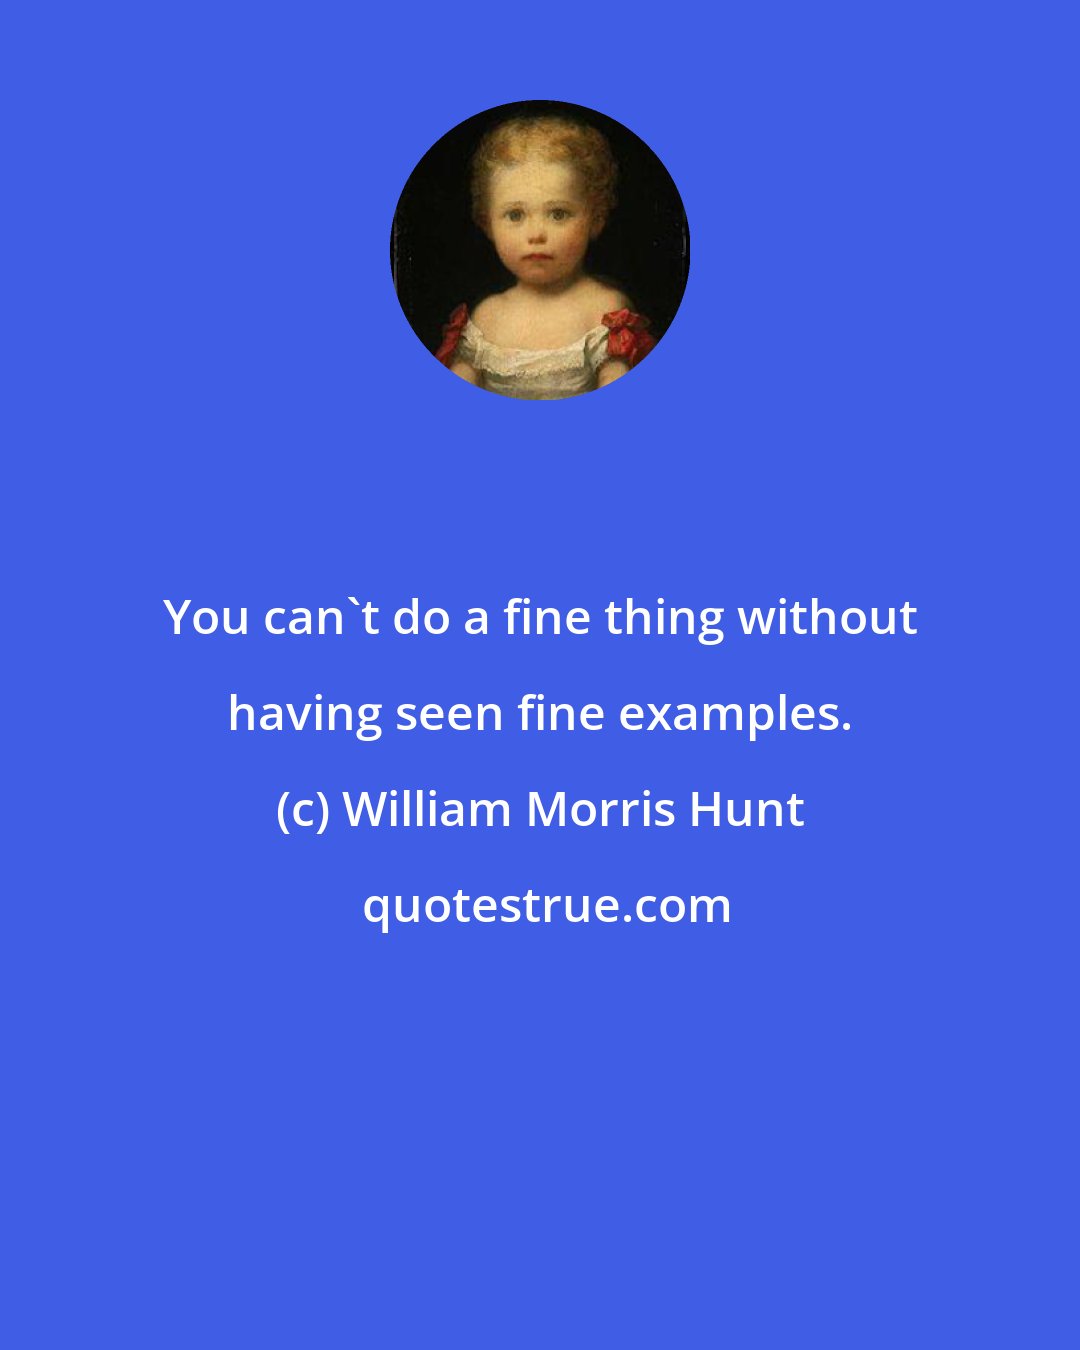 William Morris Hunt: You can't do a fine thing without having seen fine examples.